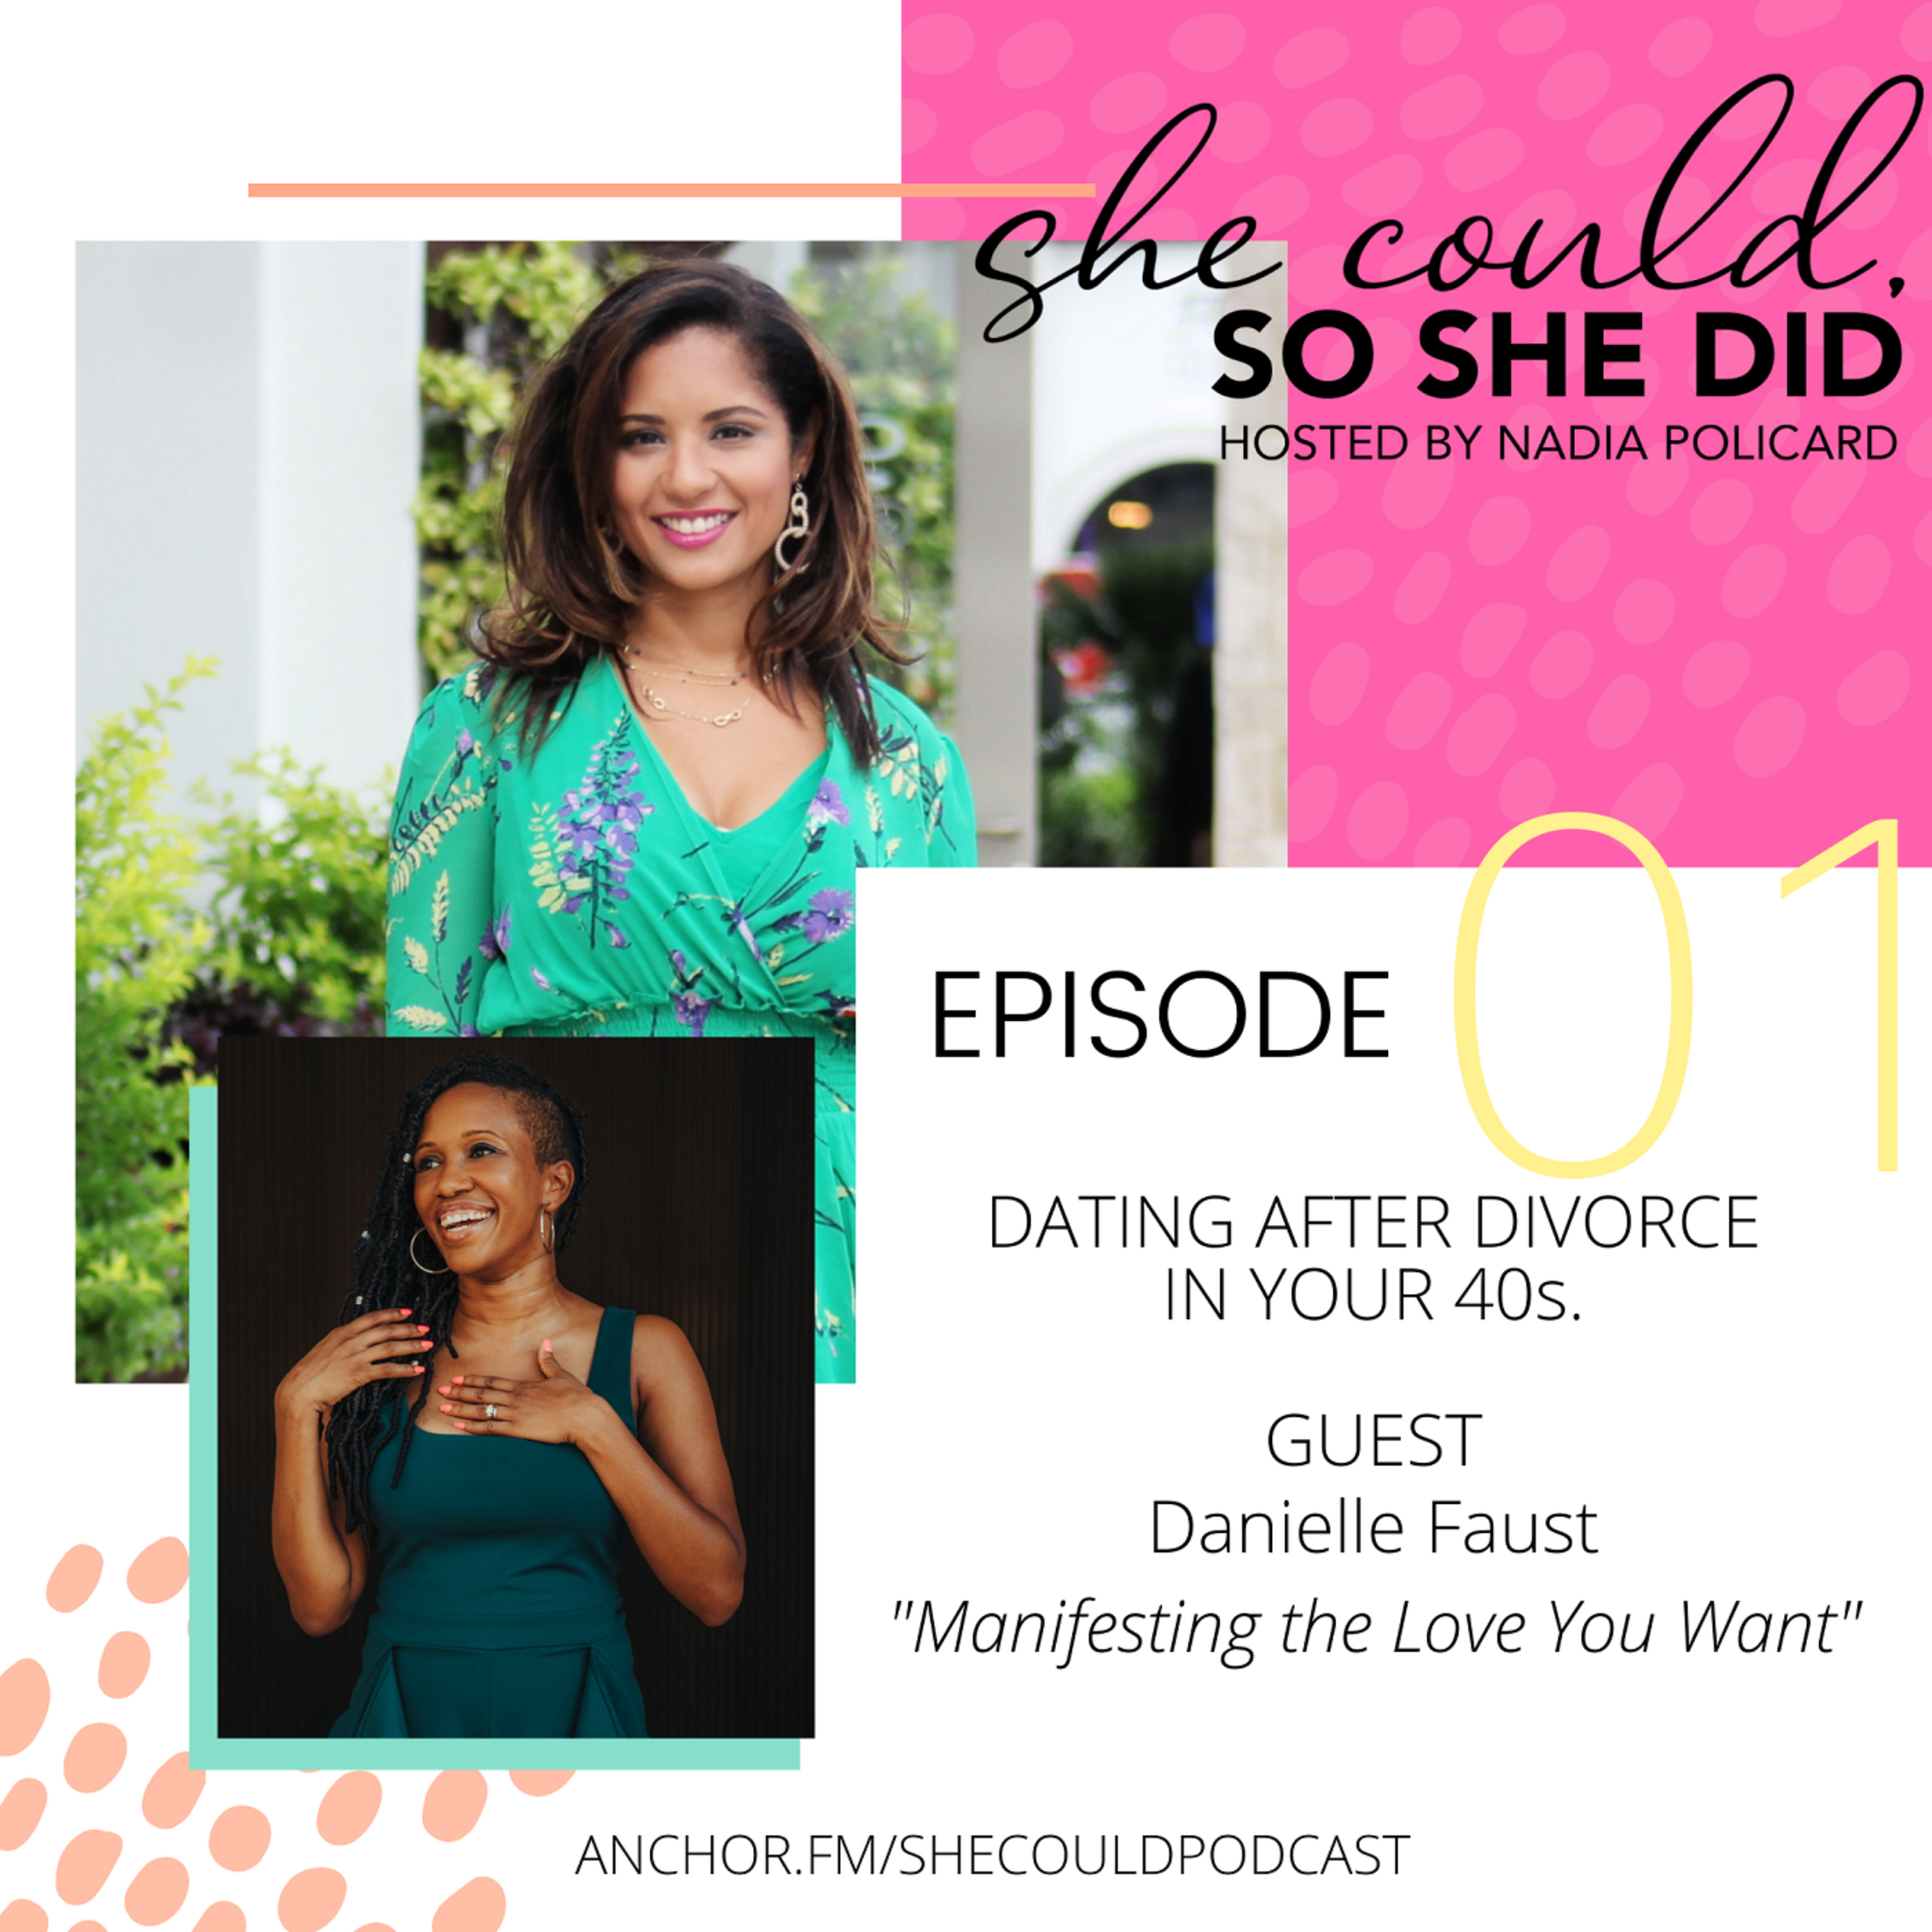 Season 2, Ep 1: Manifesting the Love You Want with Danielle Faust